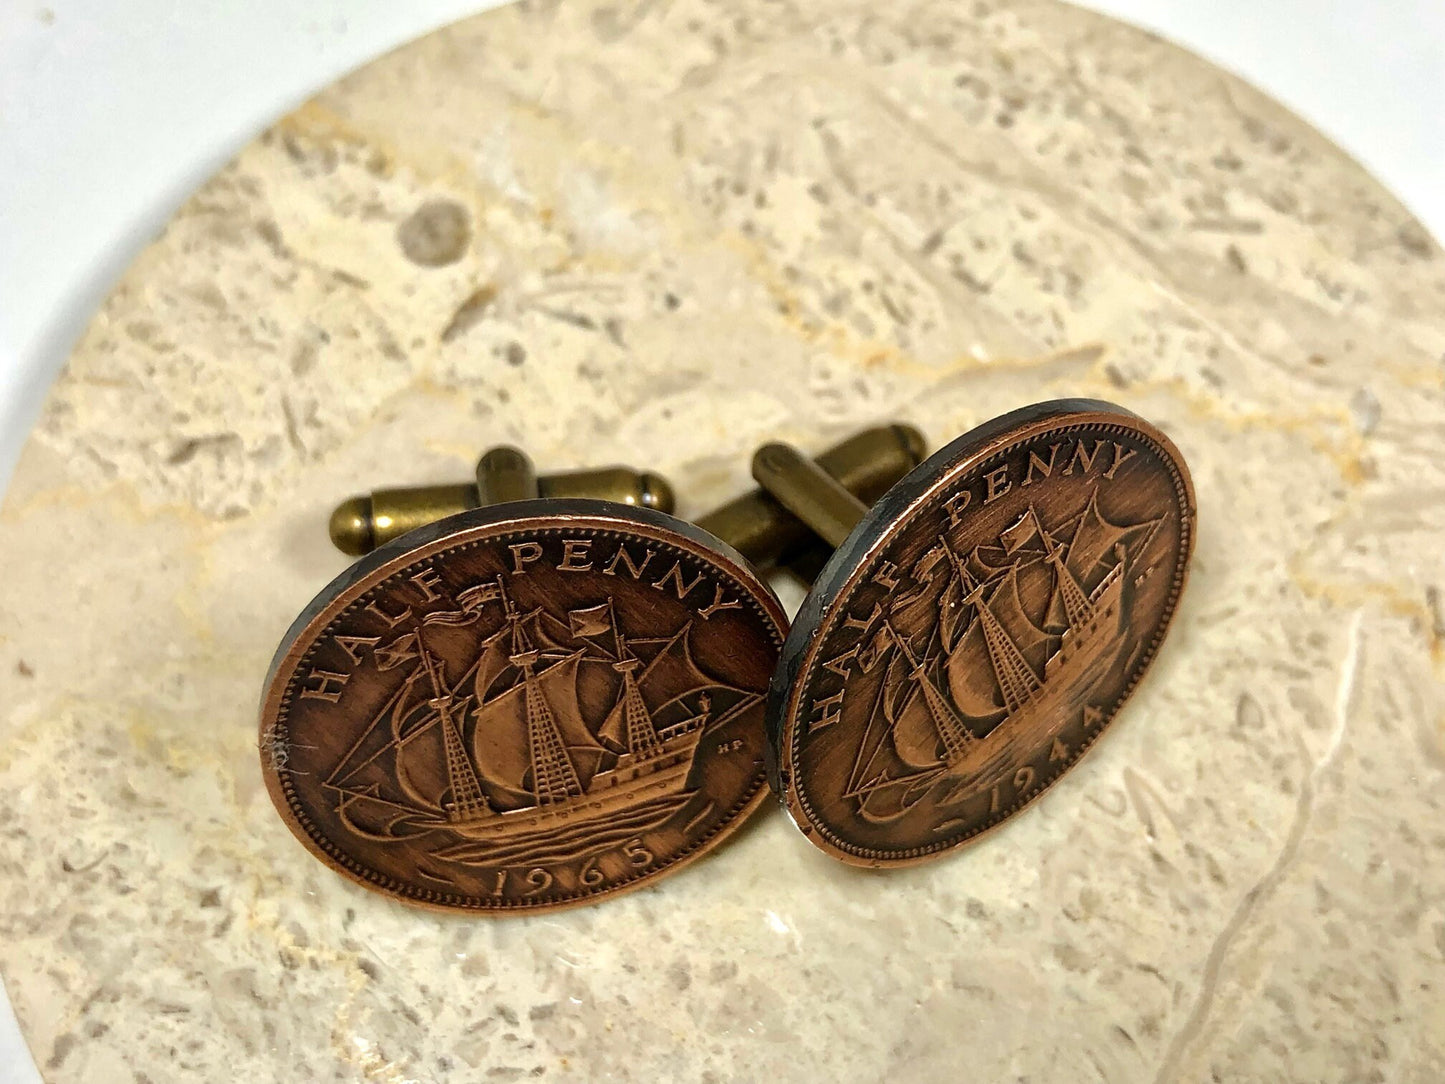 Britain Coin Cuff Links British Half Penny United Kingdom Custom Made Vintage and Rare coins - Coin Enthusiast - Suit and Tie Accessory